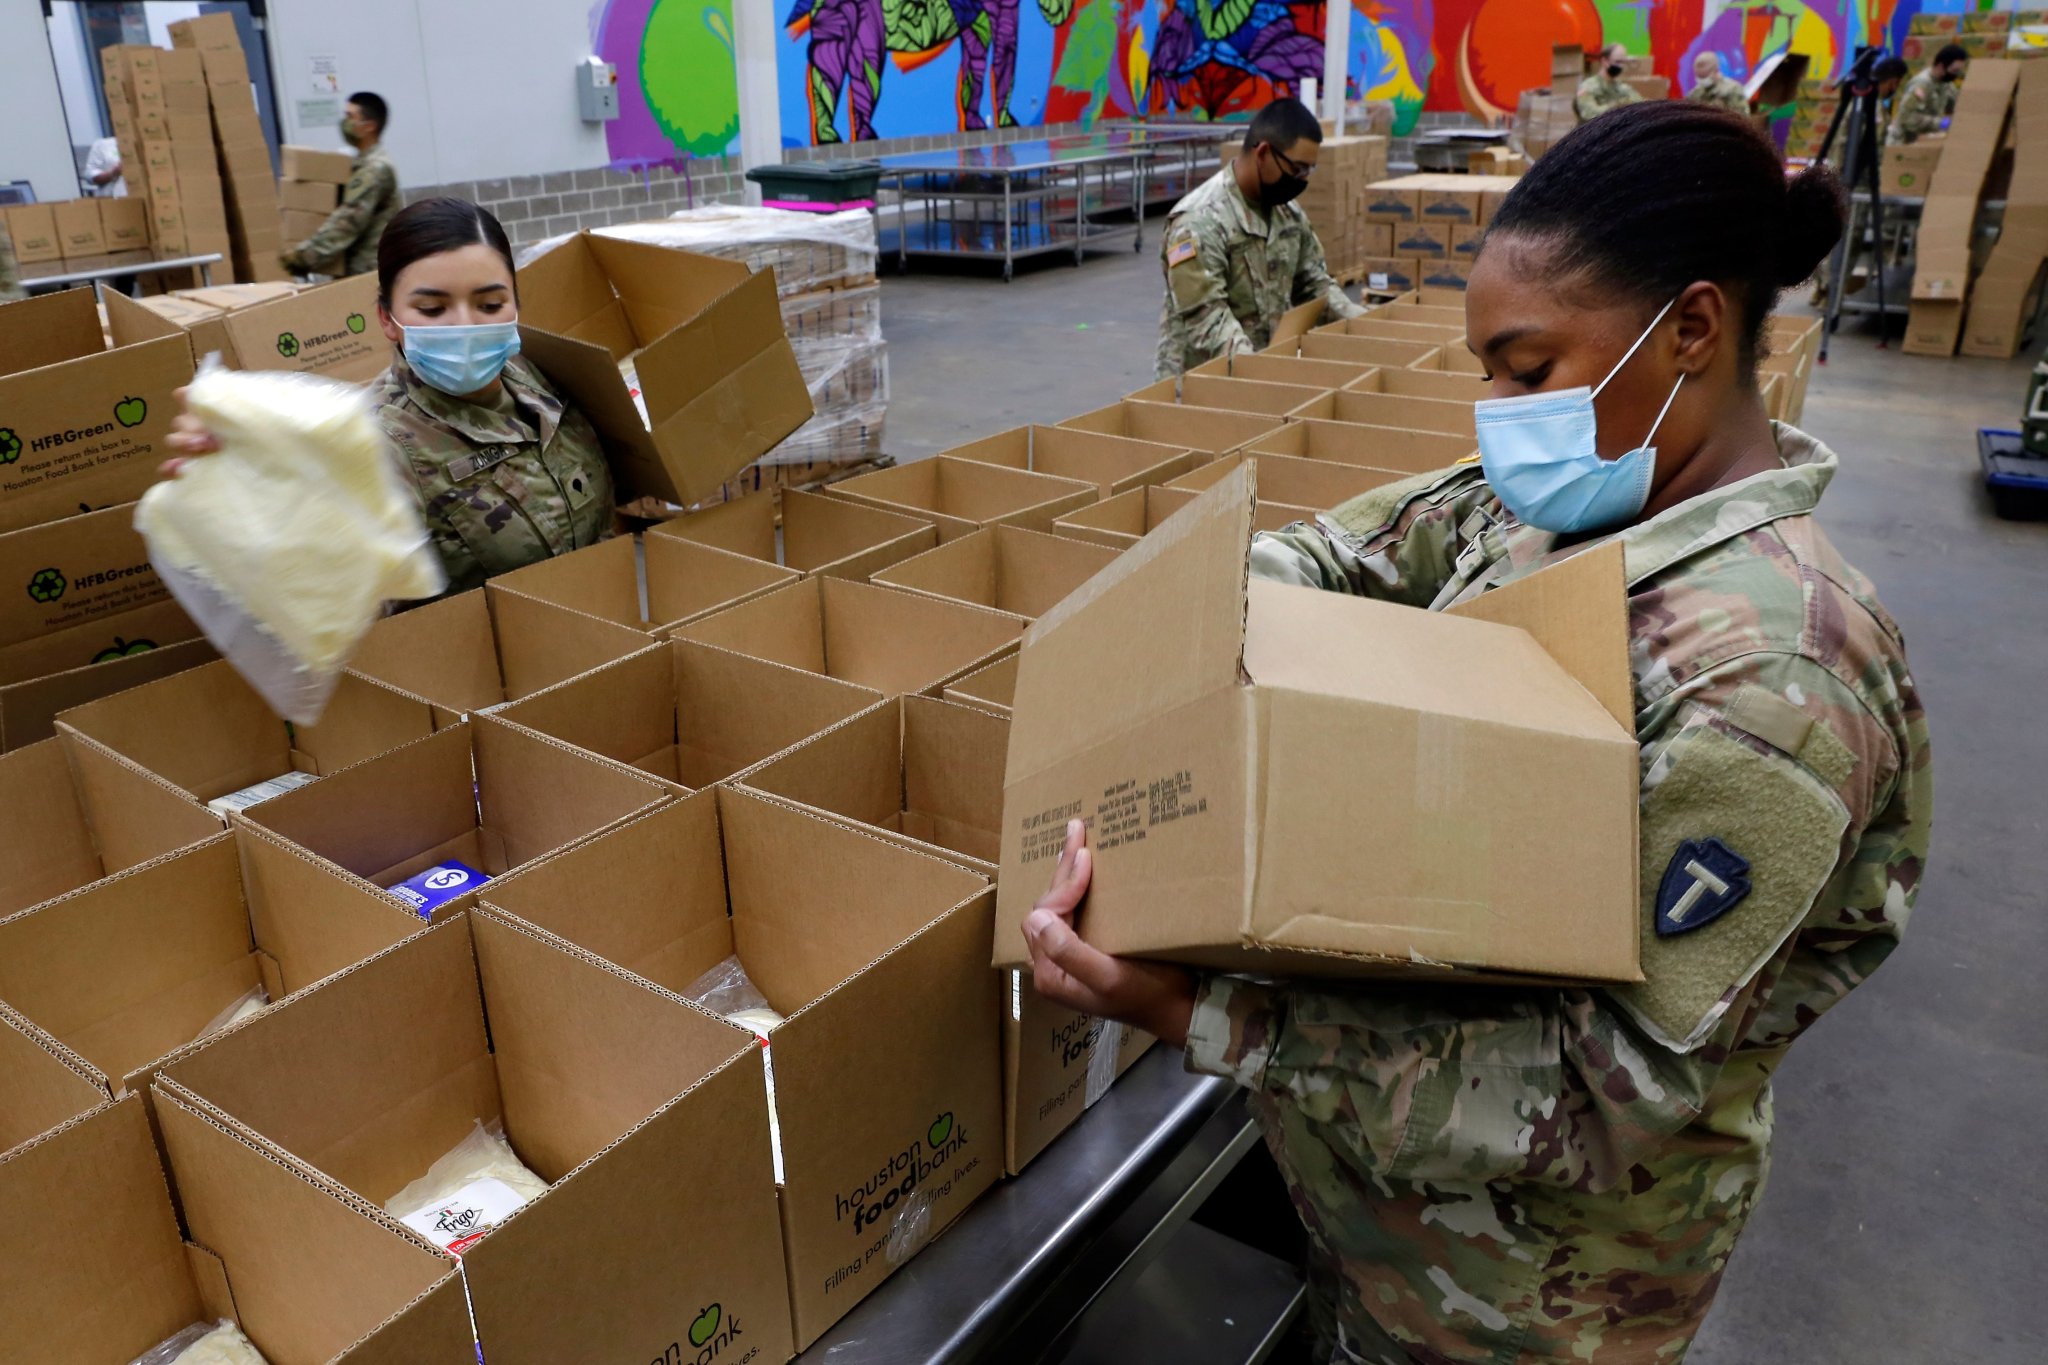 Largest food bank in US sees demand double amid coronavirus pandemic